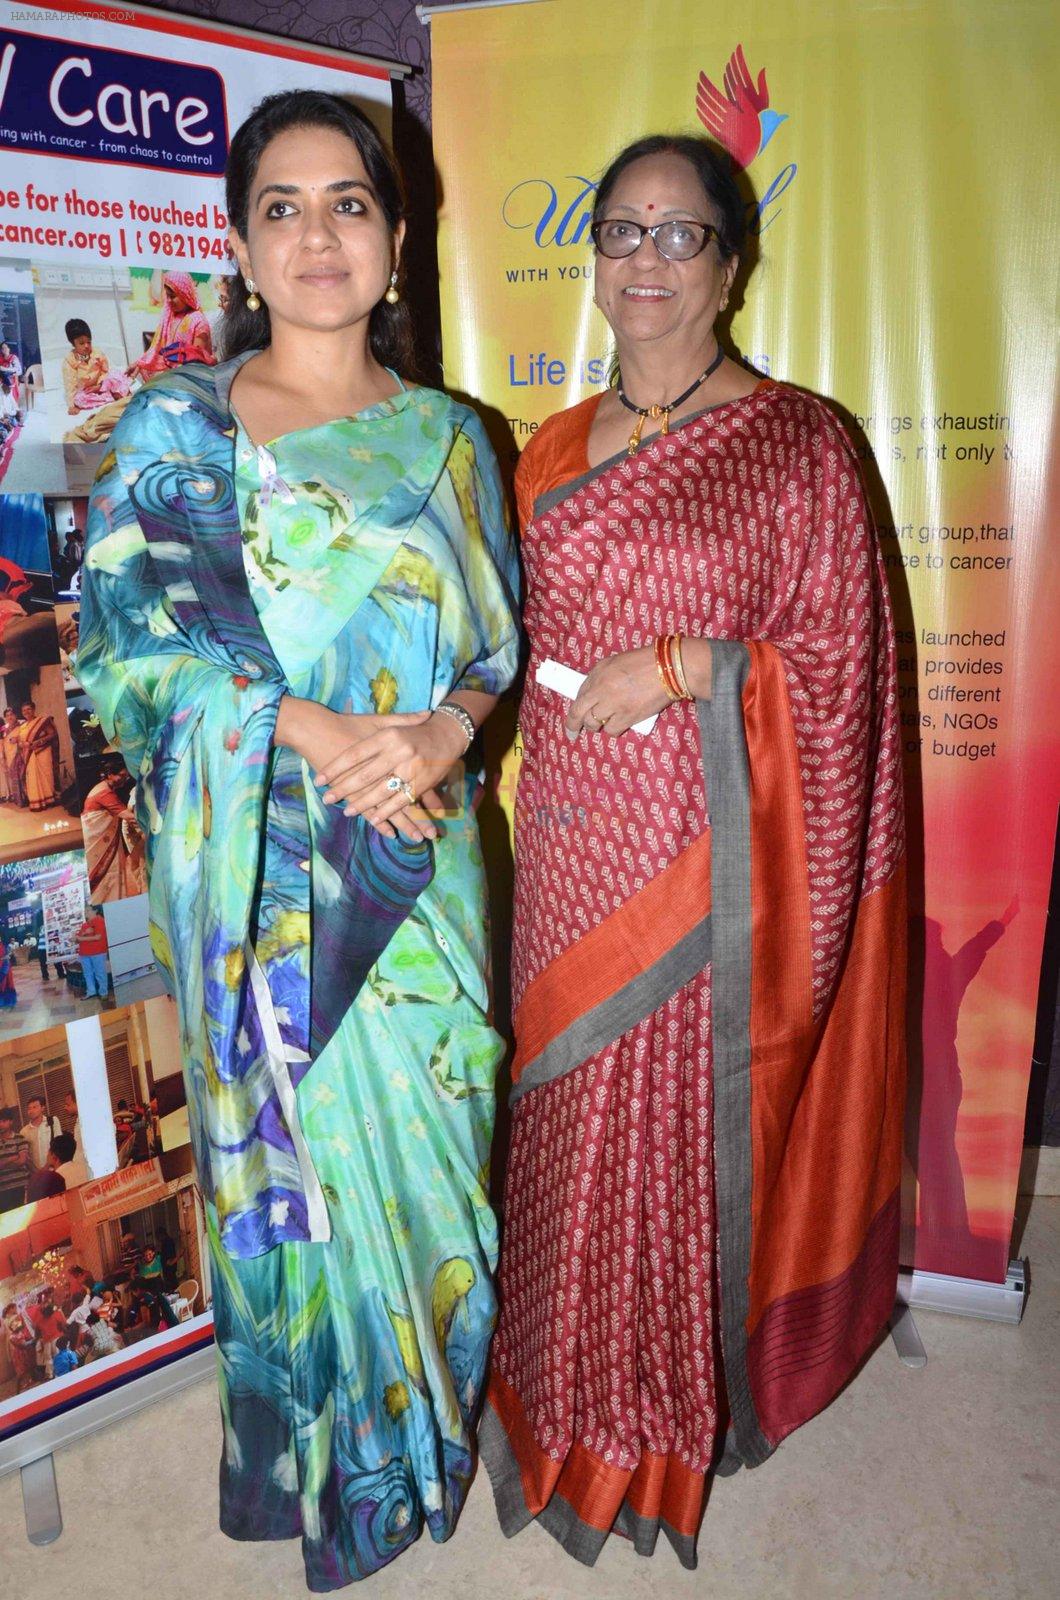 Shaina NC at a cancer cause event in Mumbai on 21st Feb 2016